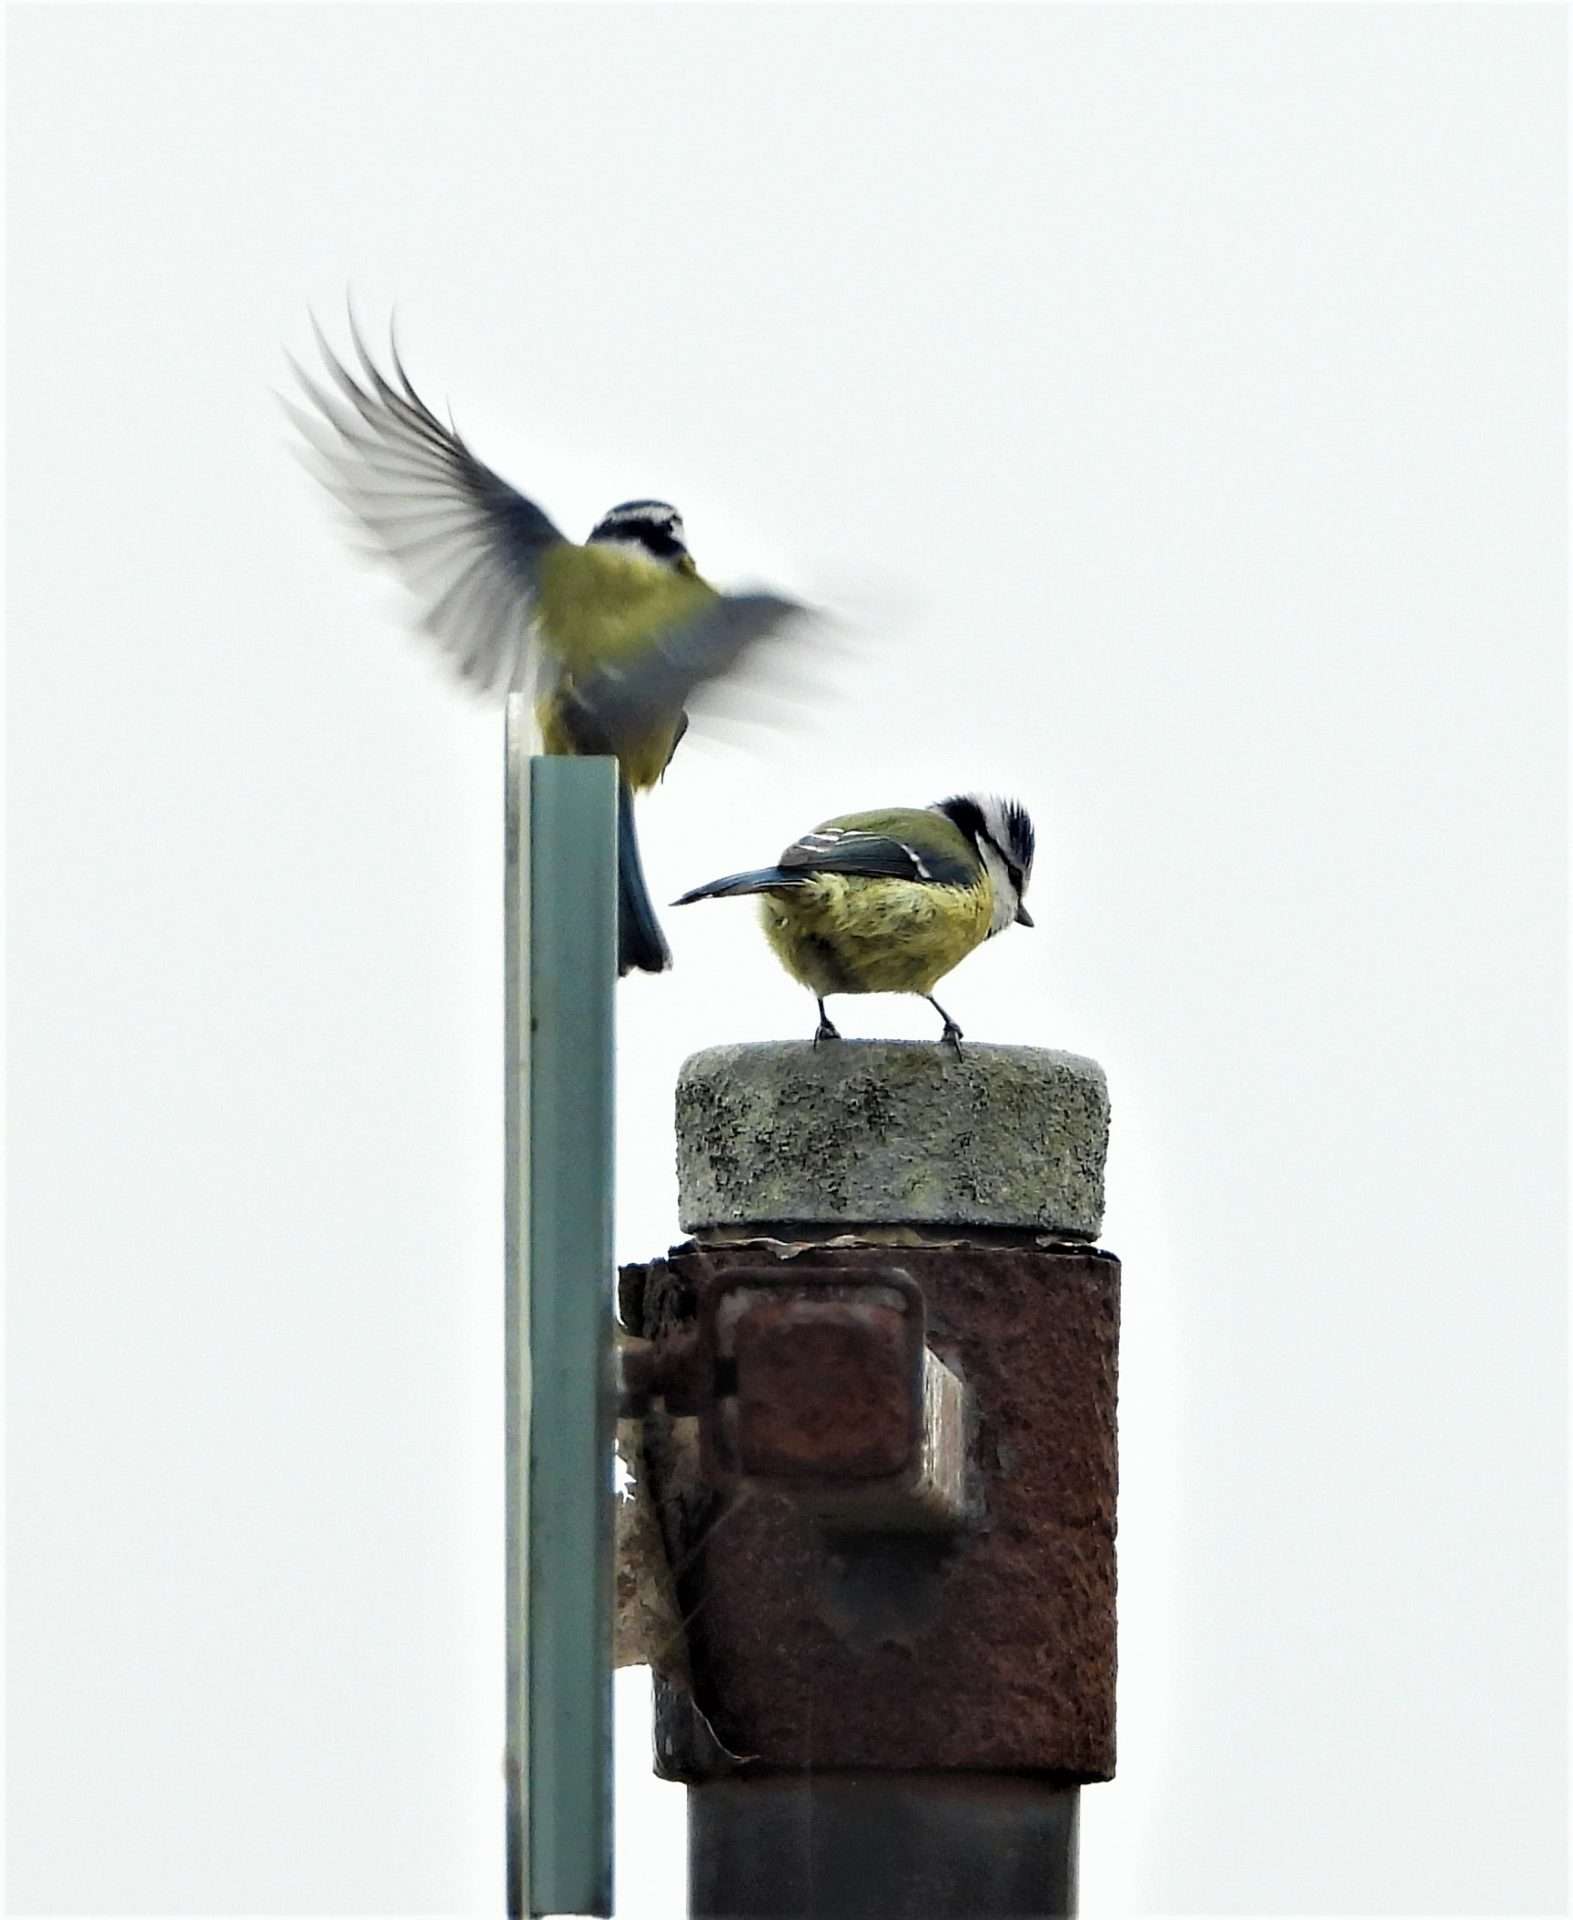 Blue Tit by Kenneth Bradley at Exminster marshes RSPB